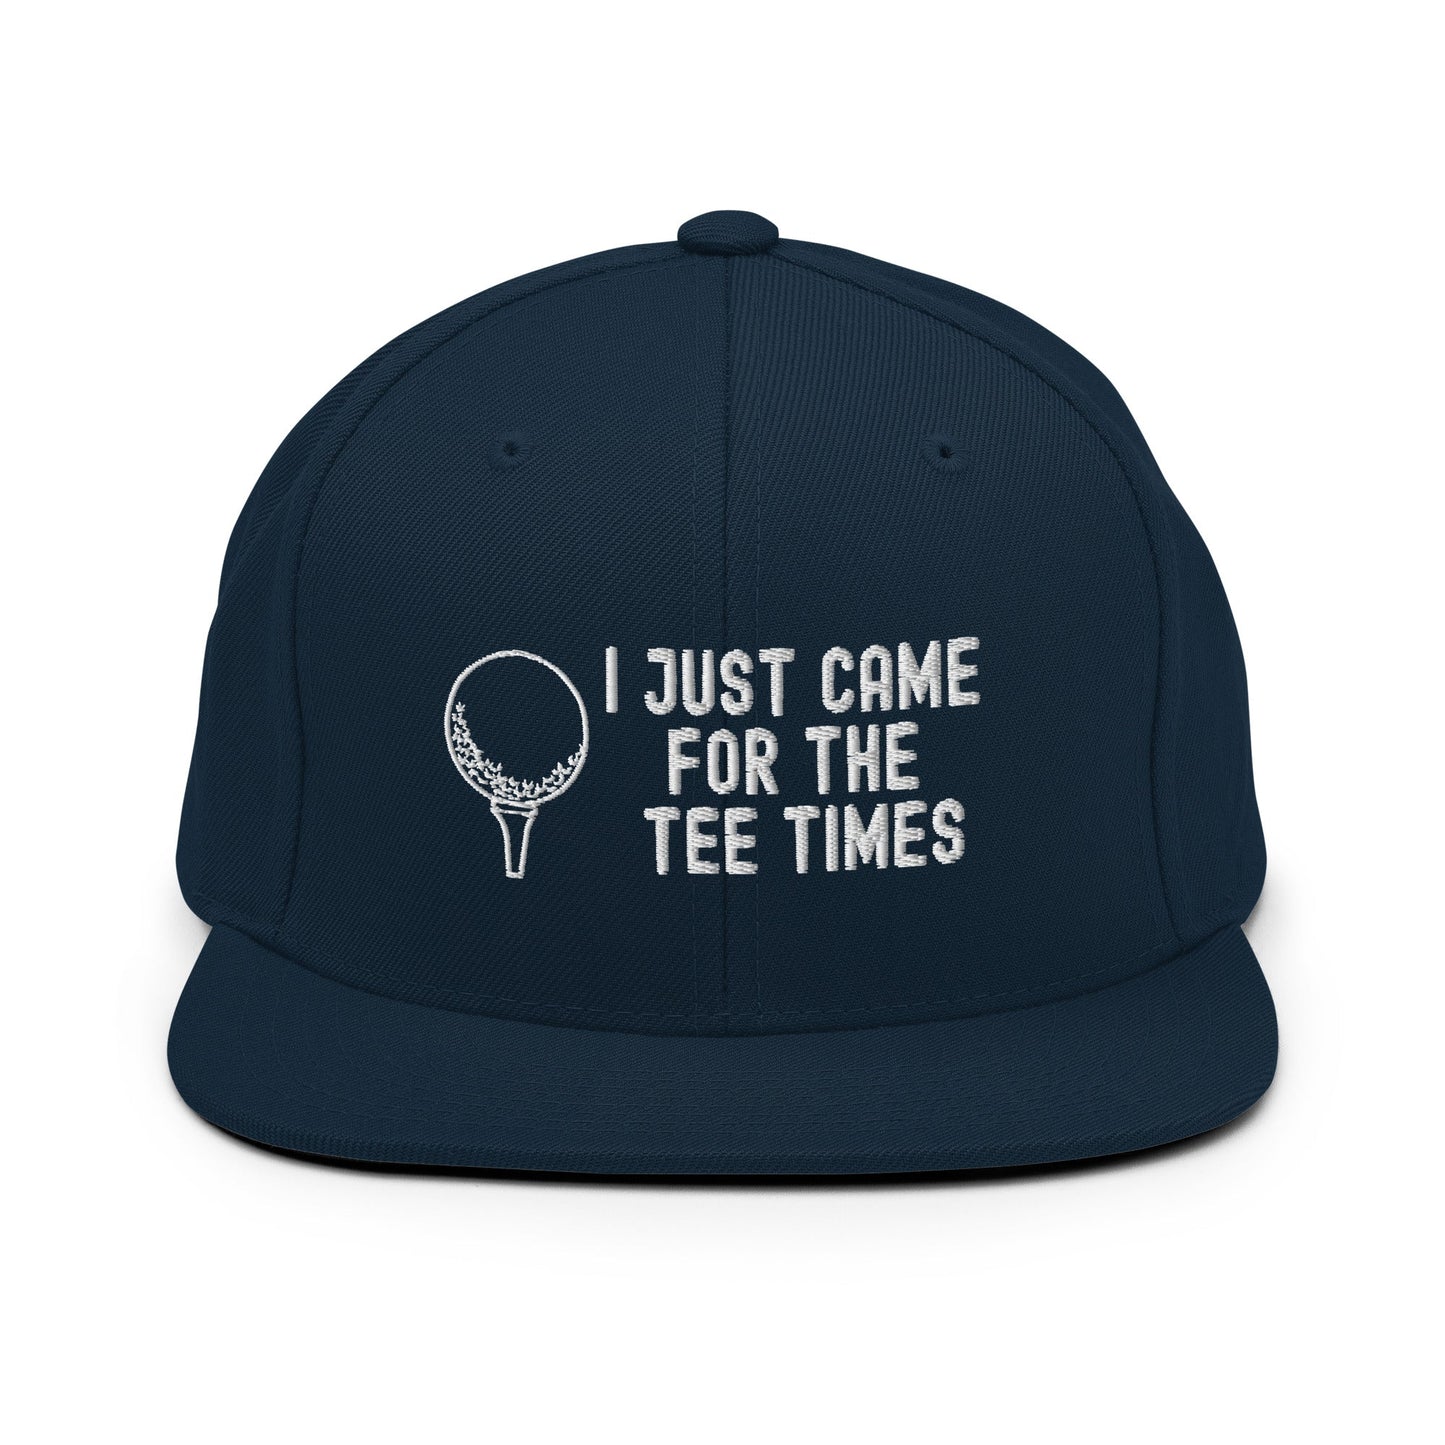 Funny Golfer Gifts  Snapback Hat Dark Navy I Just Came For The Tee Times Snapback Hat